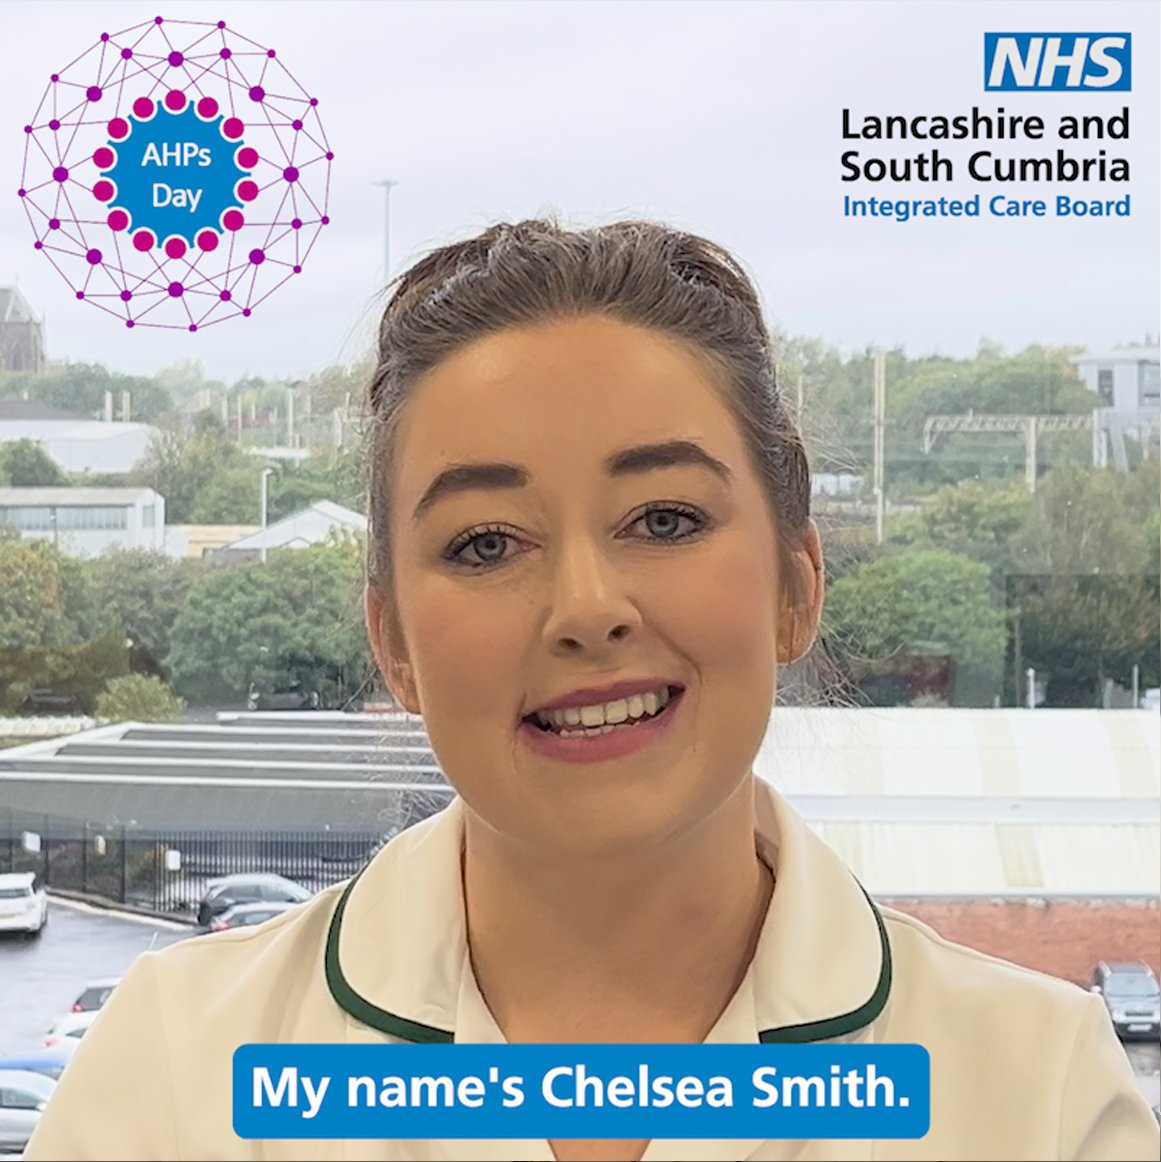 Chelsea is an occupational therapist specialising in acute surgery at Royal Blackburn Hospital Watch now 📺 orlo.uk/fpHkc #AHPsDay2023 @LSC_ICB_AHPs